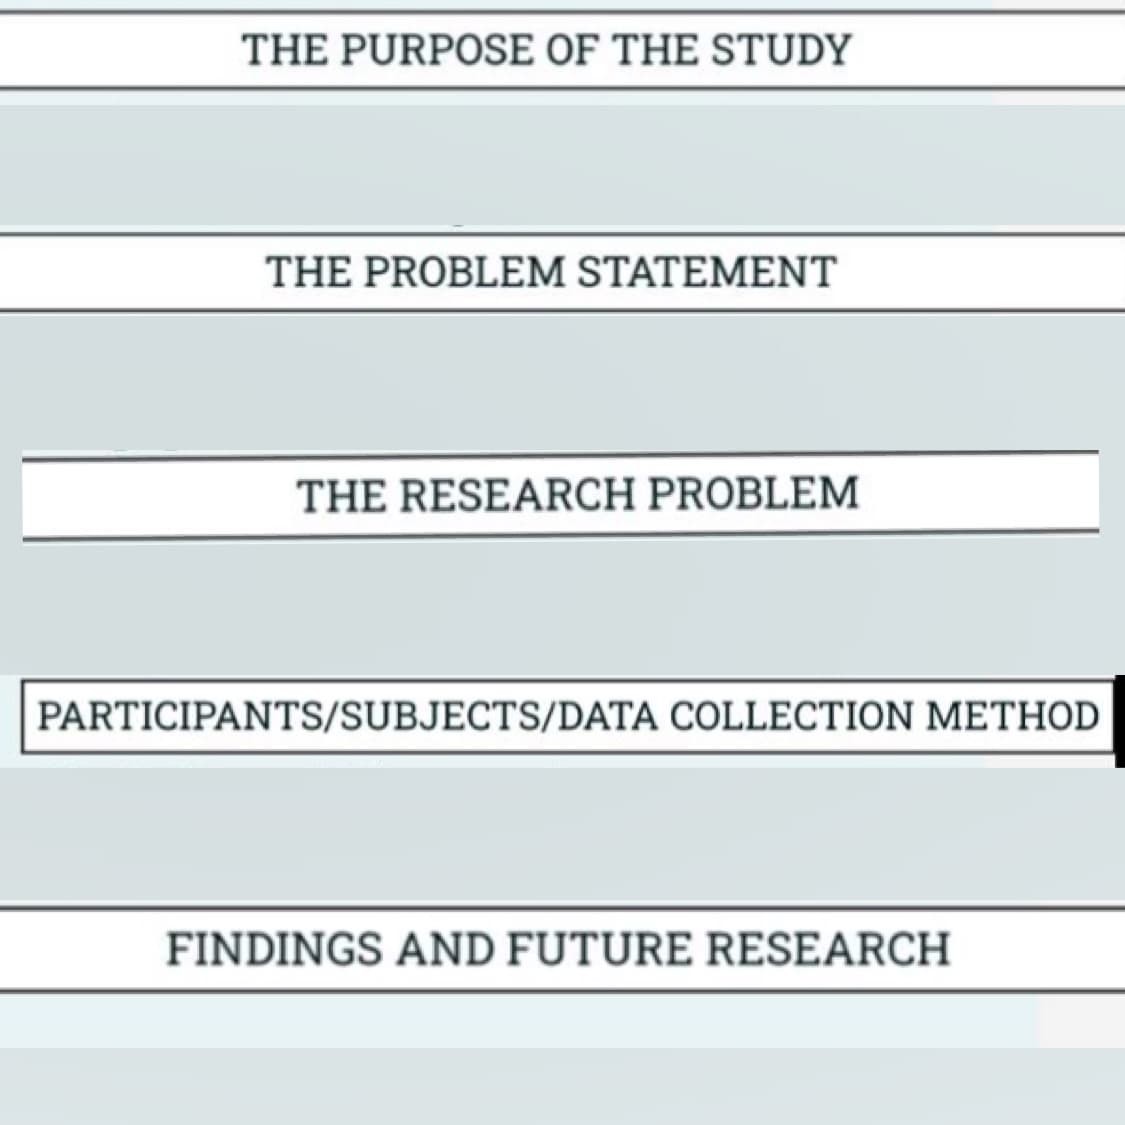 THE PURPOSE OF THE STUDY
THE PROBLEM STATEMENT
THE RESEARCH PROBLEM
PARTICIPANTS/SUBJECTS/DATA COLLECTION METHOD
FINDINGS AND FUTURE RESEARCH
